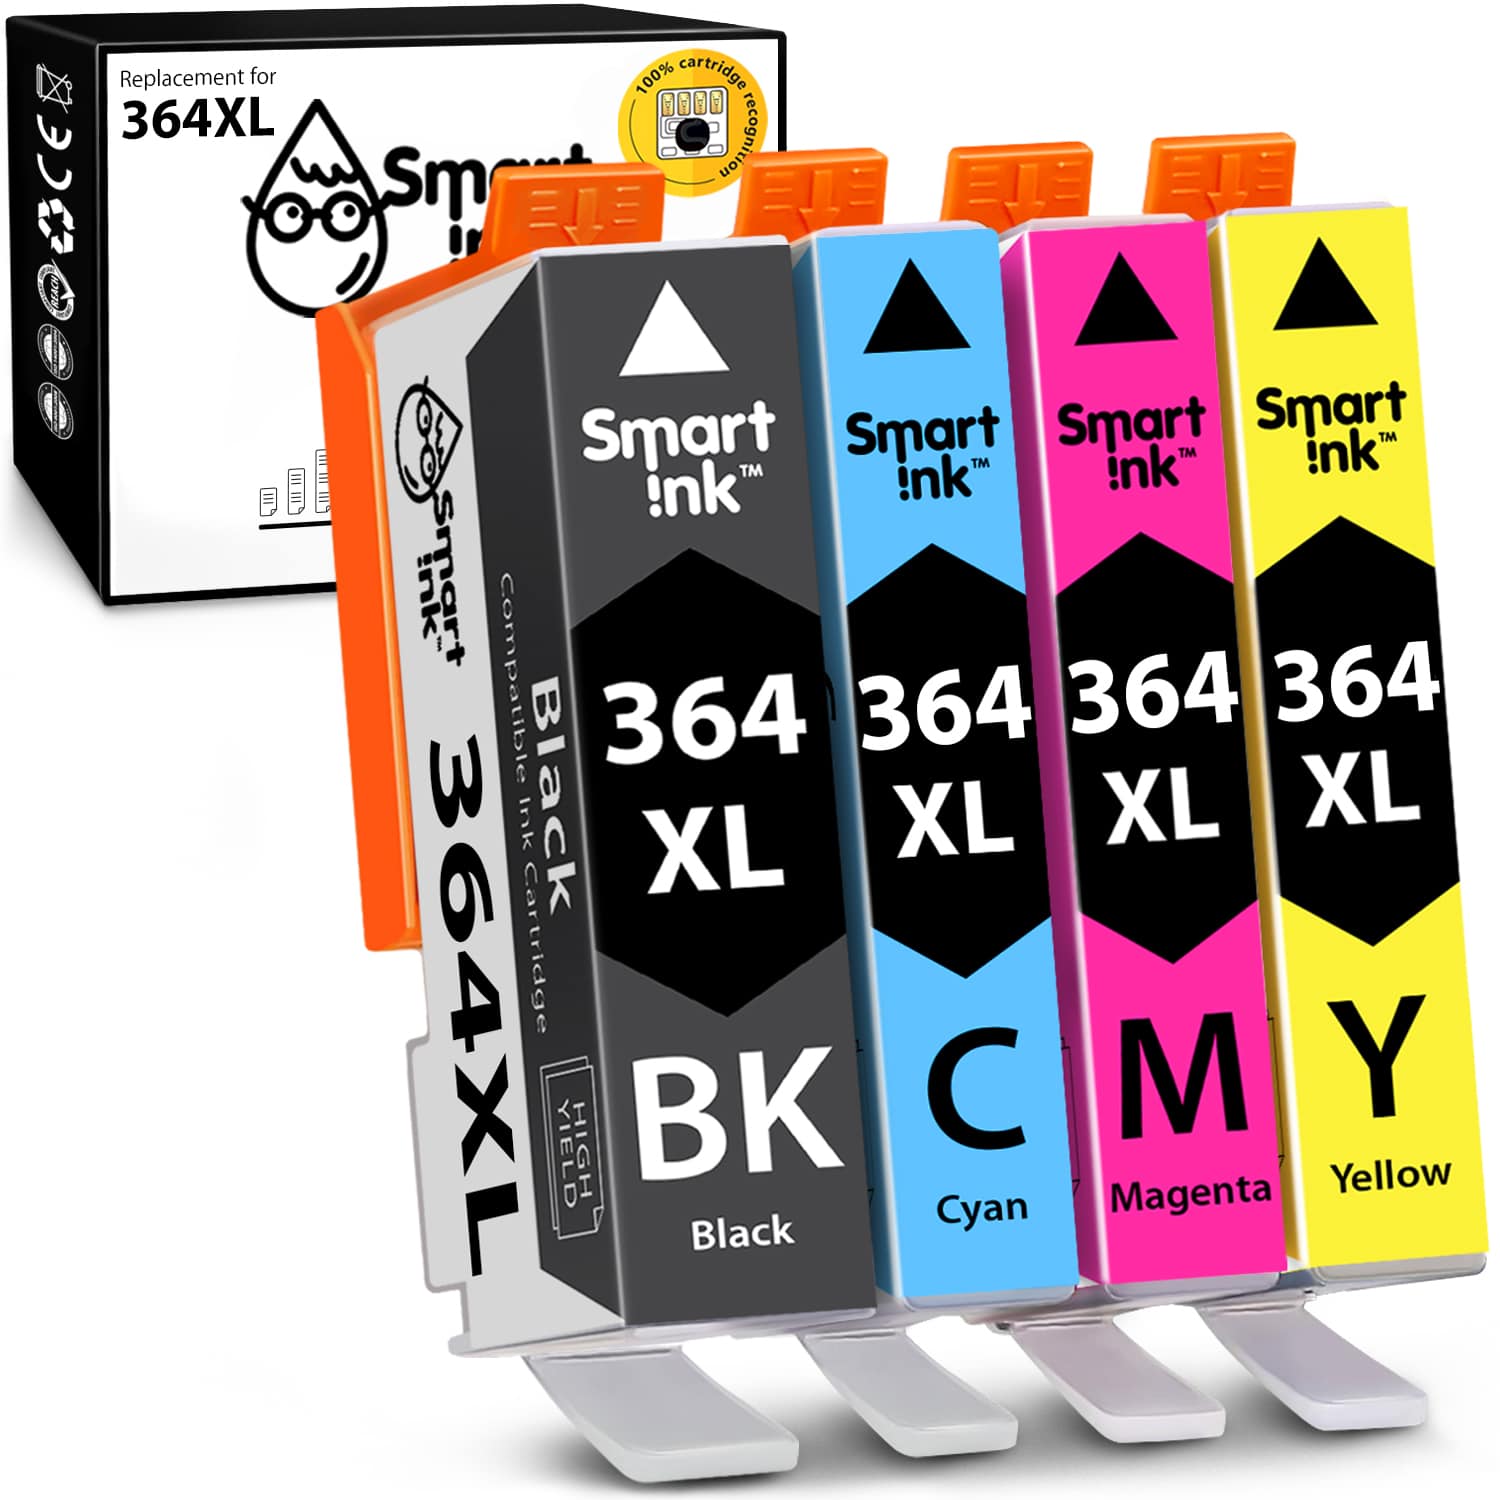 HP 364 XL (4 pack) Ink Replacement - Buy Cartridges in Europe at the best price | Smart Ink